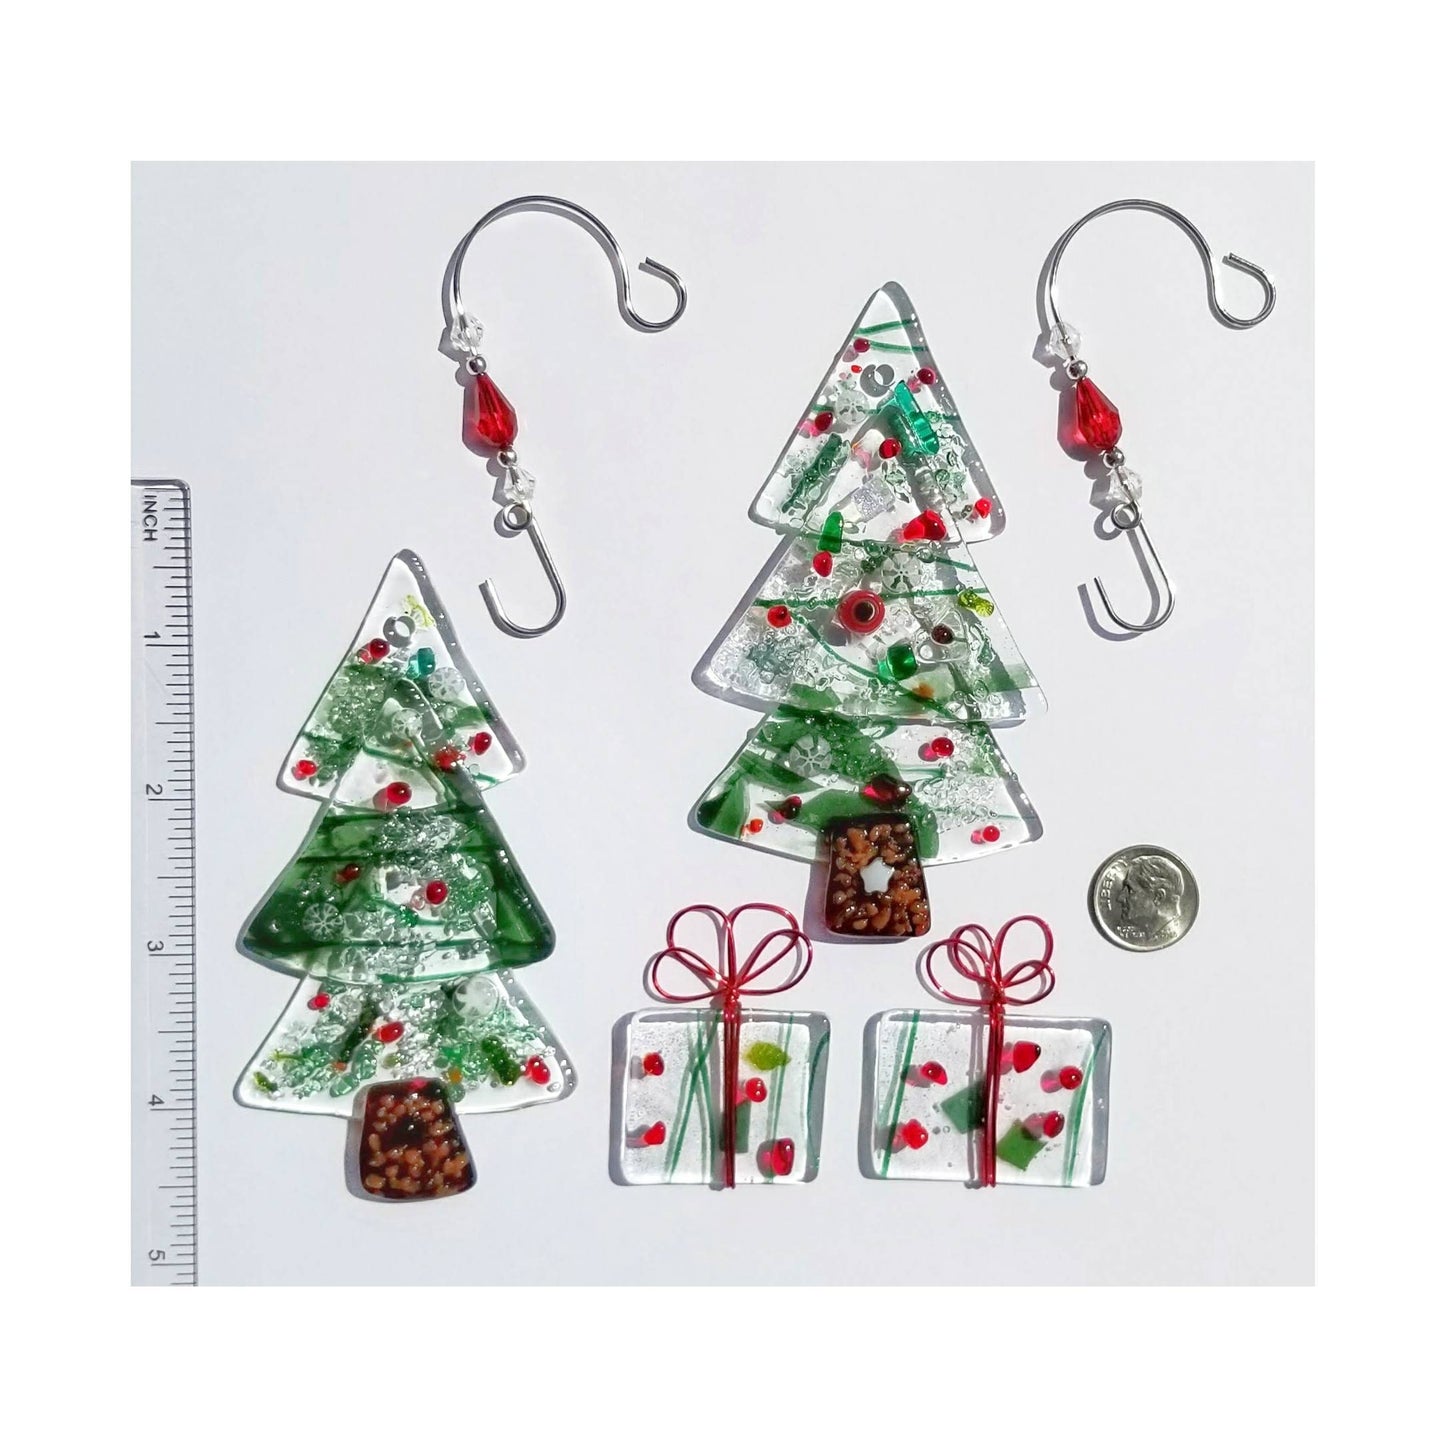 Christmas Tree Decor. Fused Glass Suncatcher & Gift Tag Ornament. 2 Piece Set. Kiln fired Holly Berry Glass. Gift boxed. Handmade.